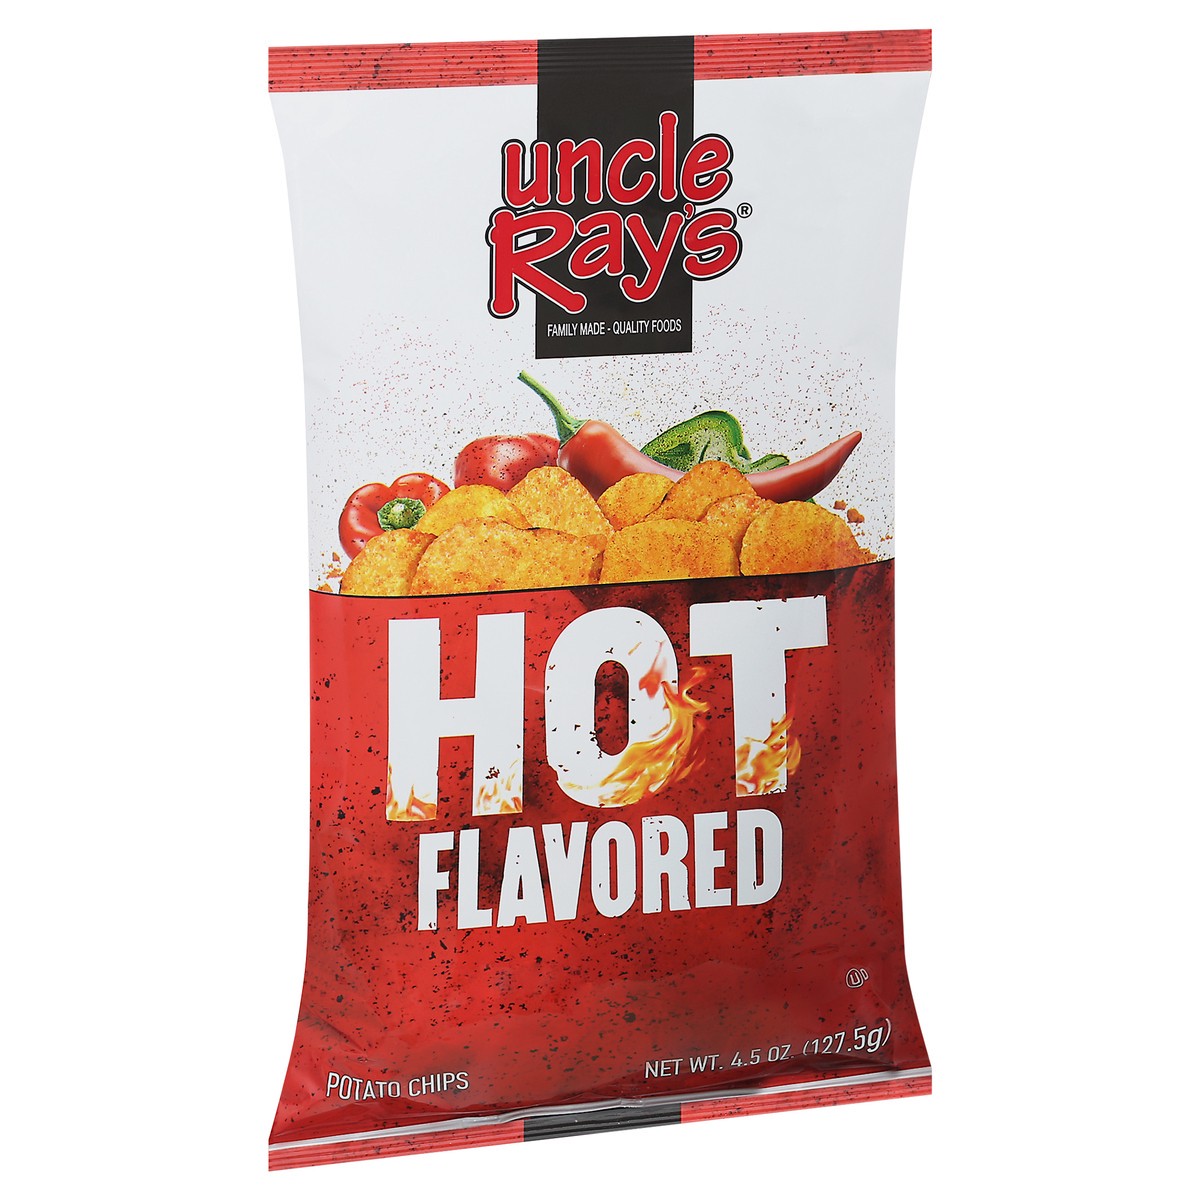 slide 12 of 14, Uncle Ray's Hot Flavored Potato Chips 4.5 oz, 4.5 oz